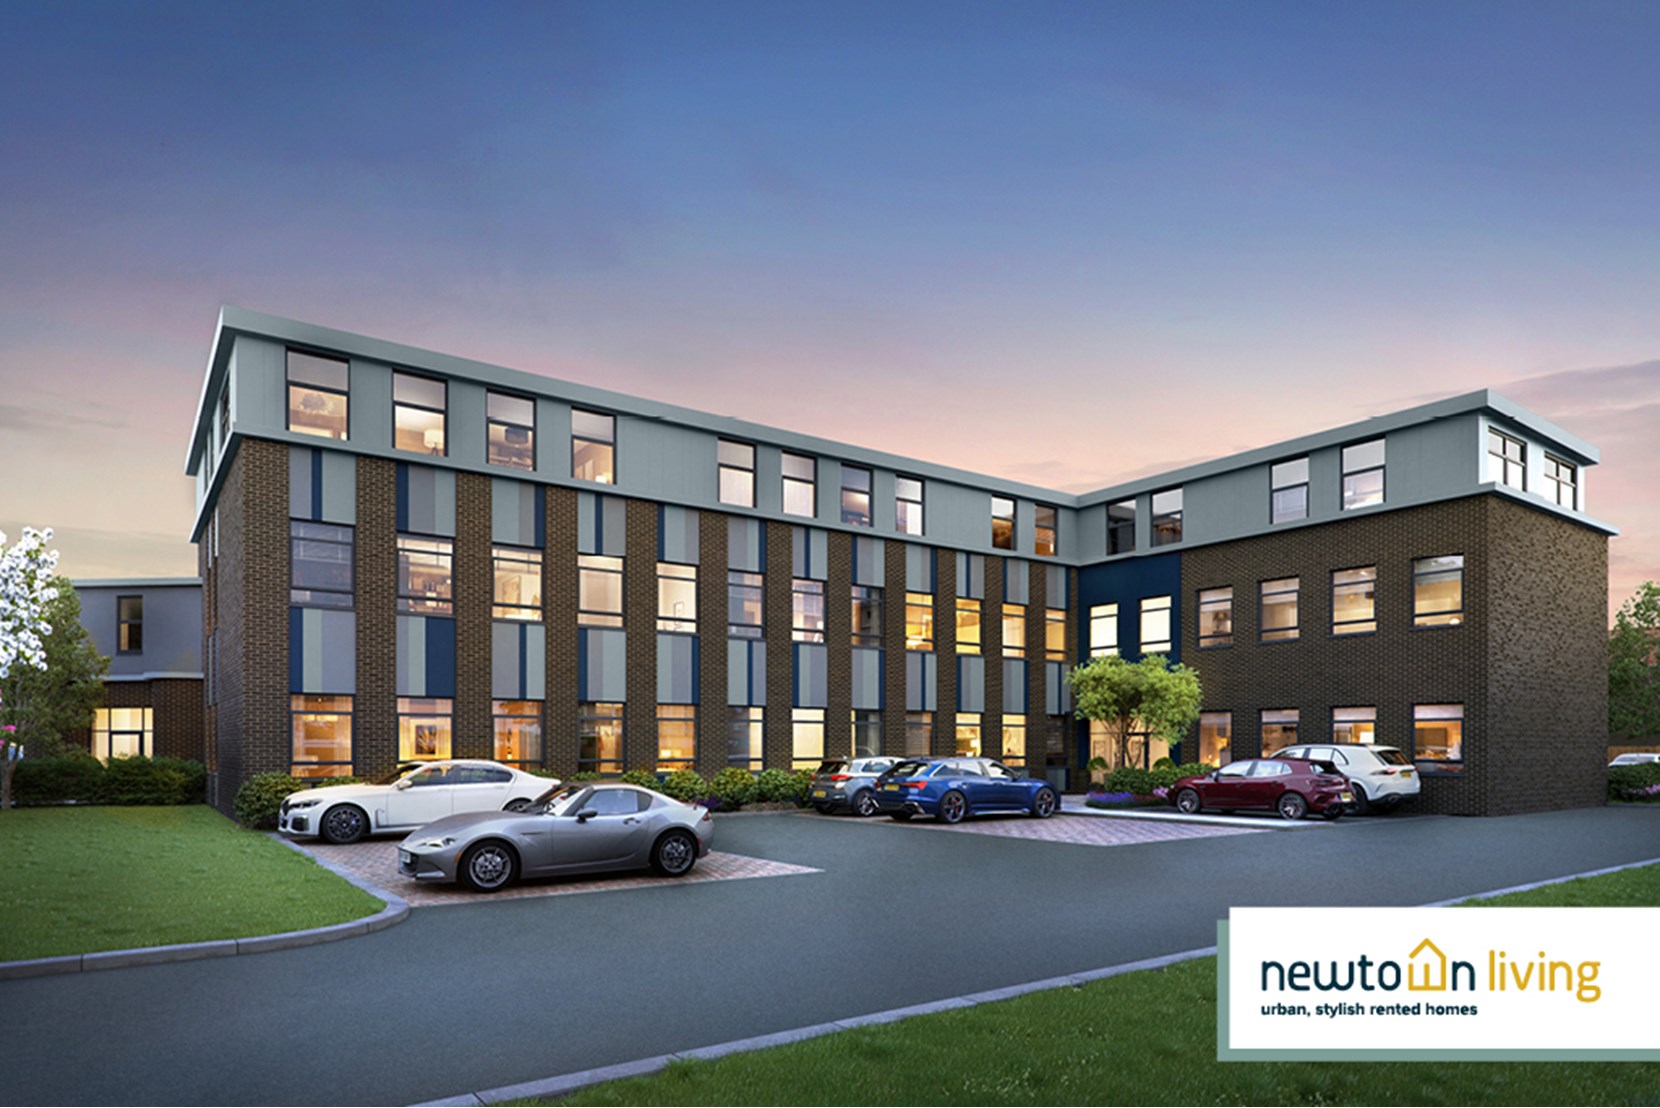 Apartments to Rent by Newton Living at Rocket Studios, Leicester, LE4, development panoramic